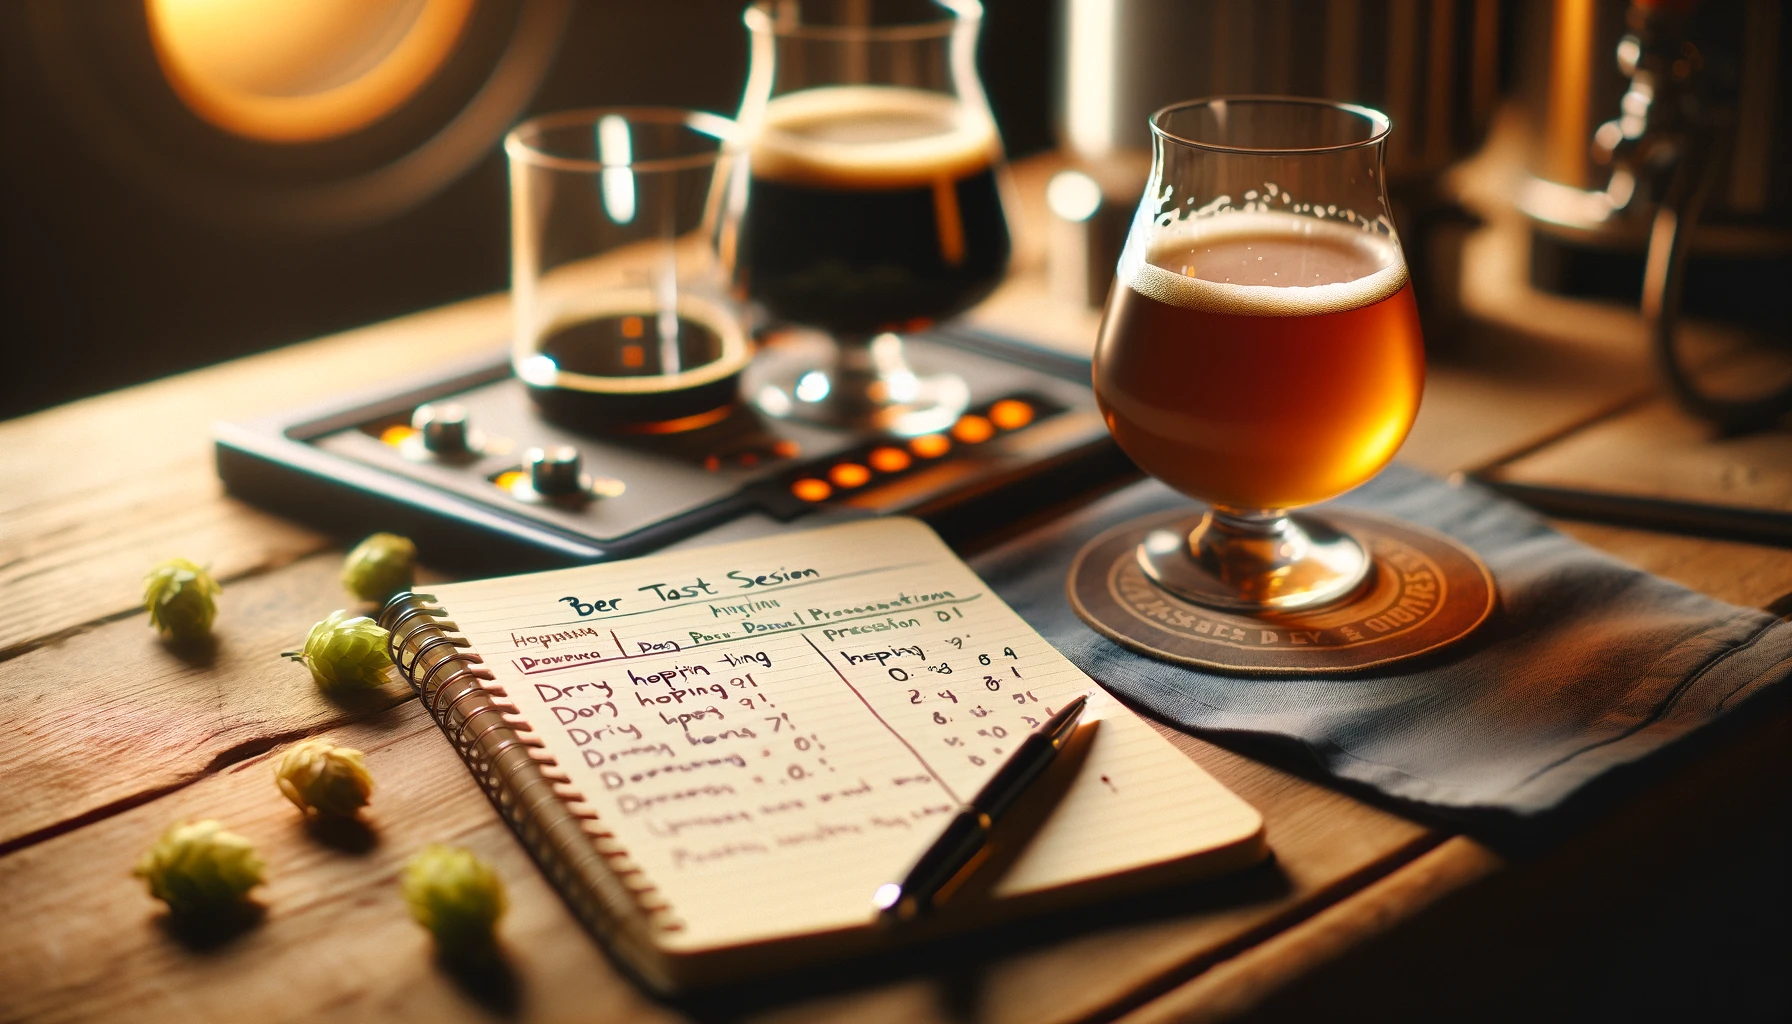 A close-up of a beer tasting session, featuring a notebook with observations, two different beers for comparison, and a pen.